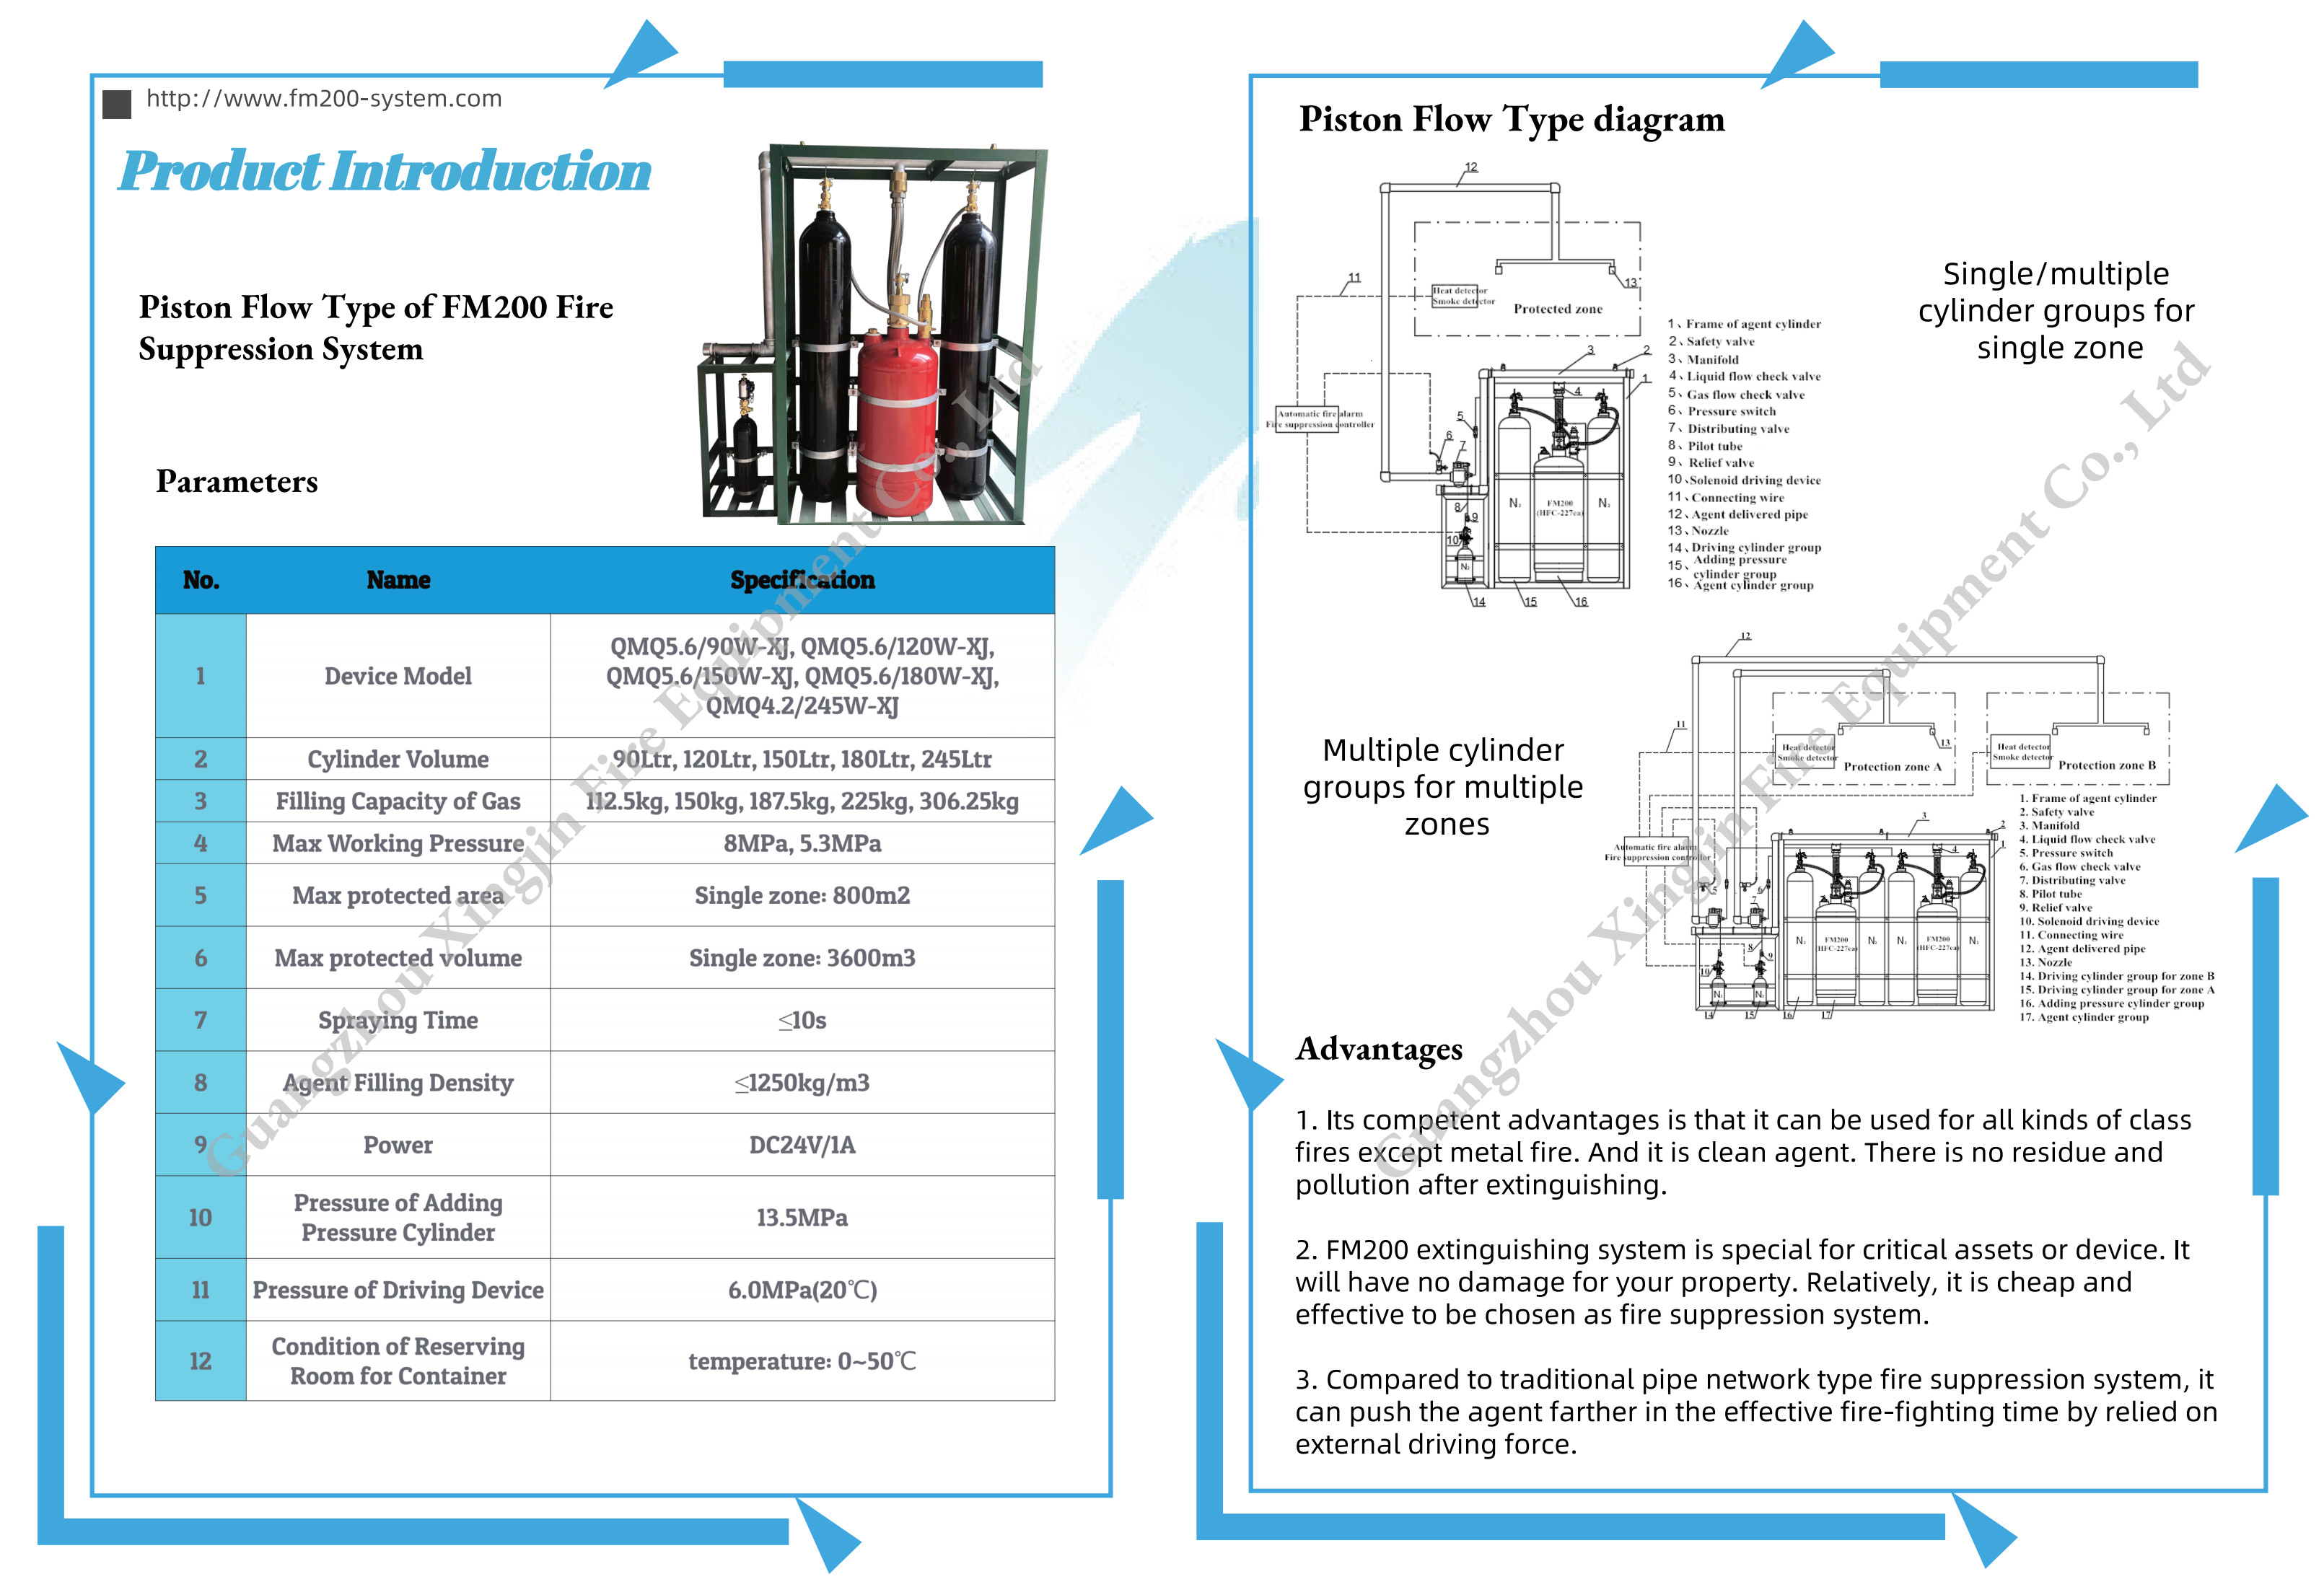 Latest company case about Catalogue of FM200 fire suppression system--piston flow type(2021 edition)